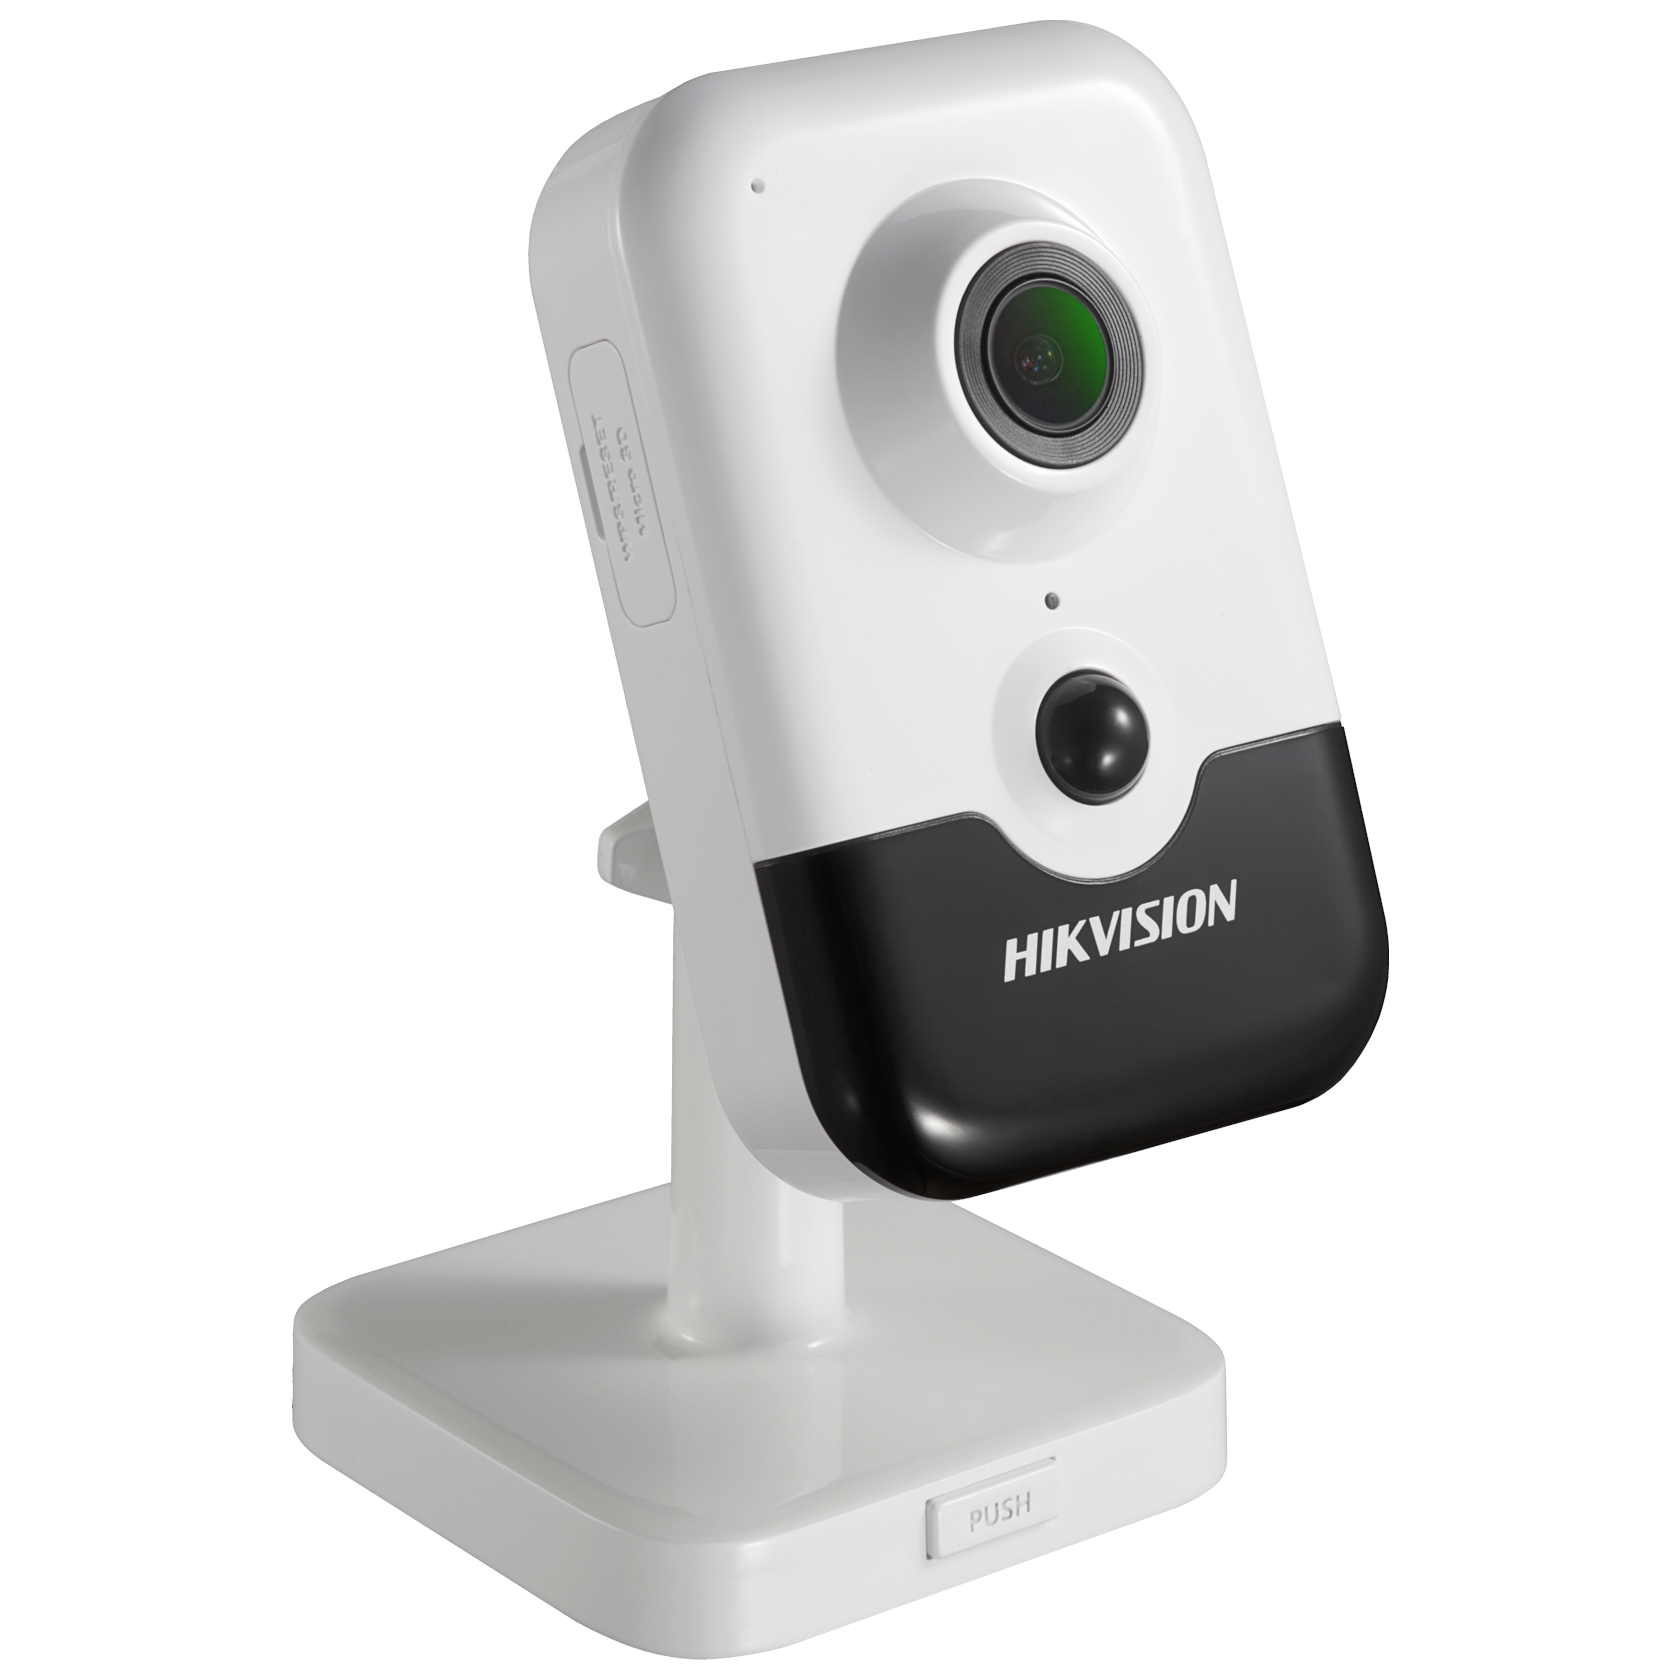 HIKVISION%20DS-2CD2443G0-IW%204MP%202.8MM%2010MT%20H265+%20WIFI%20CUBE%20KAMERA